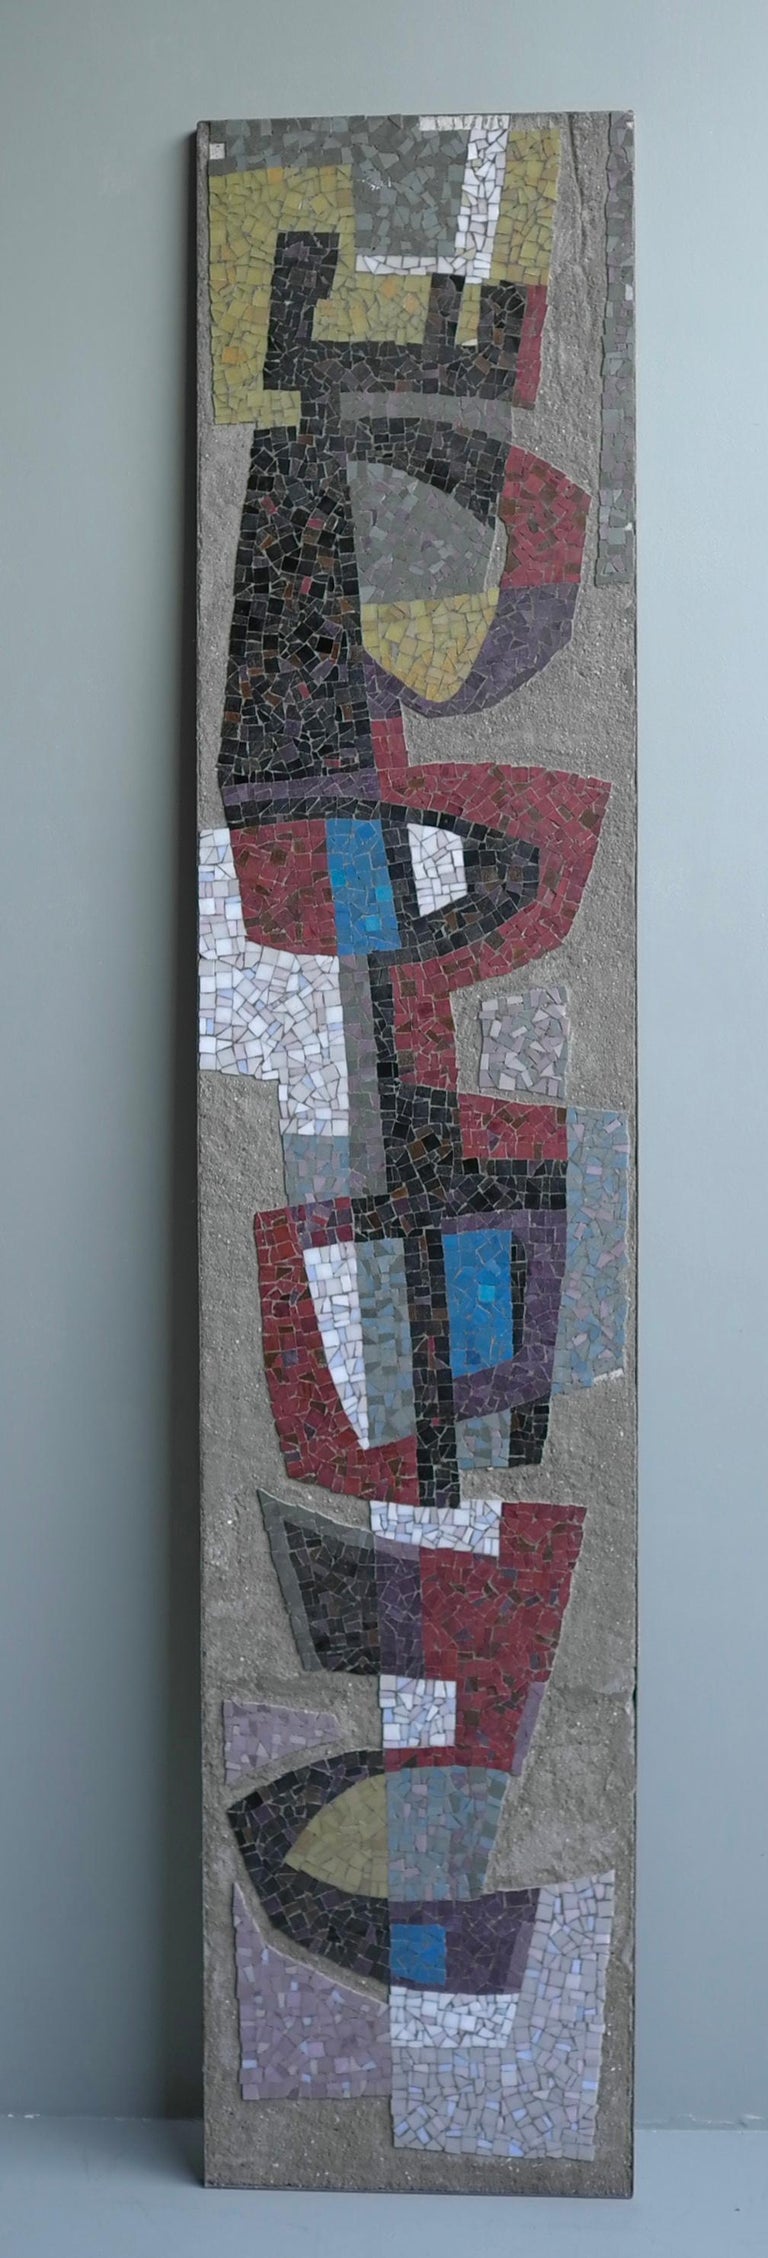 Large wall-mounted sculpture colored stone in concrete Mid-Century Modern, 1952

This wall Sculpture was taken out of a building by Dutch Architect Jan Duiker. It should be made circa 1952, the sculpture is signed with ACK. Jan Duiker (also